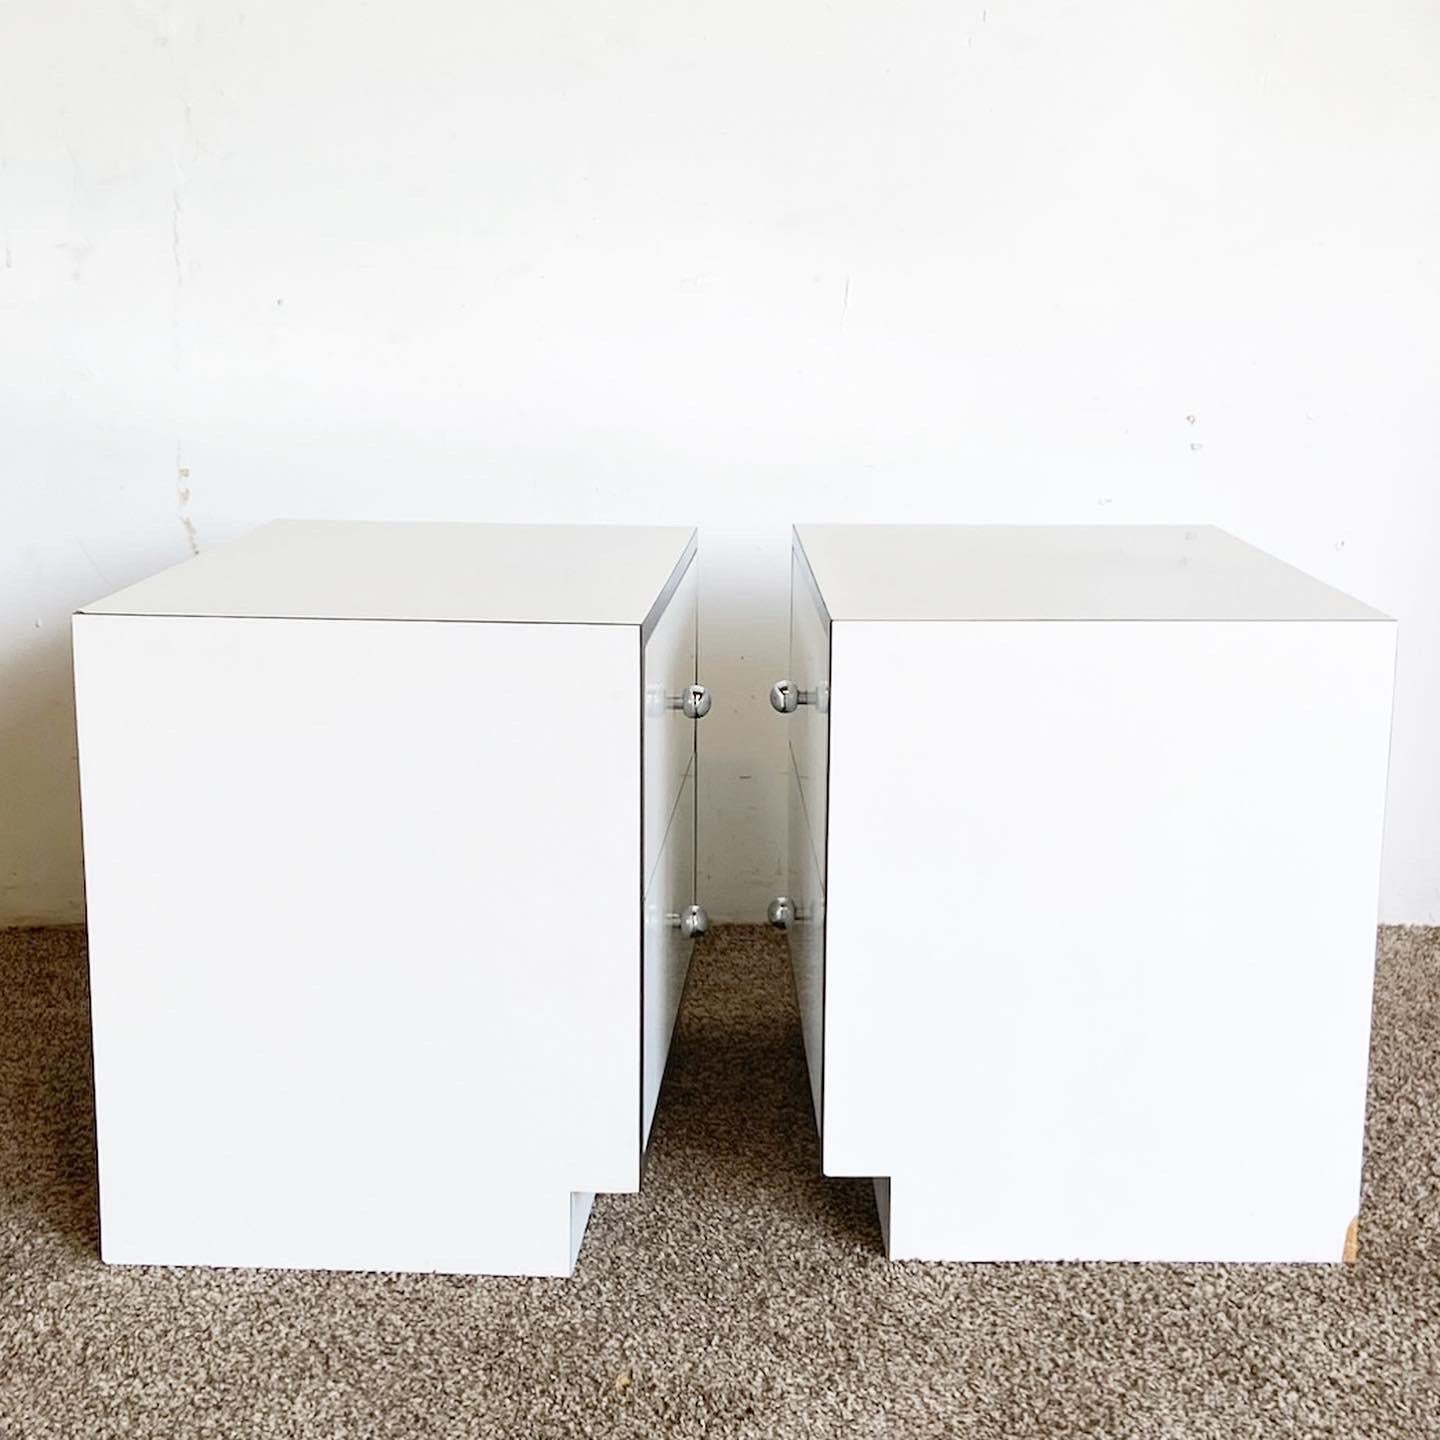 Late 20th Century Postmodern White Lacquer Laminate and Chrome Nightstands, a Pair